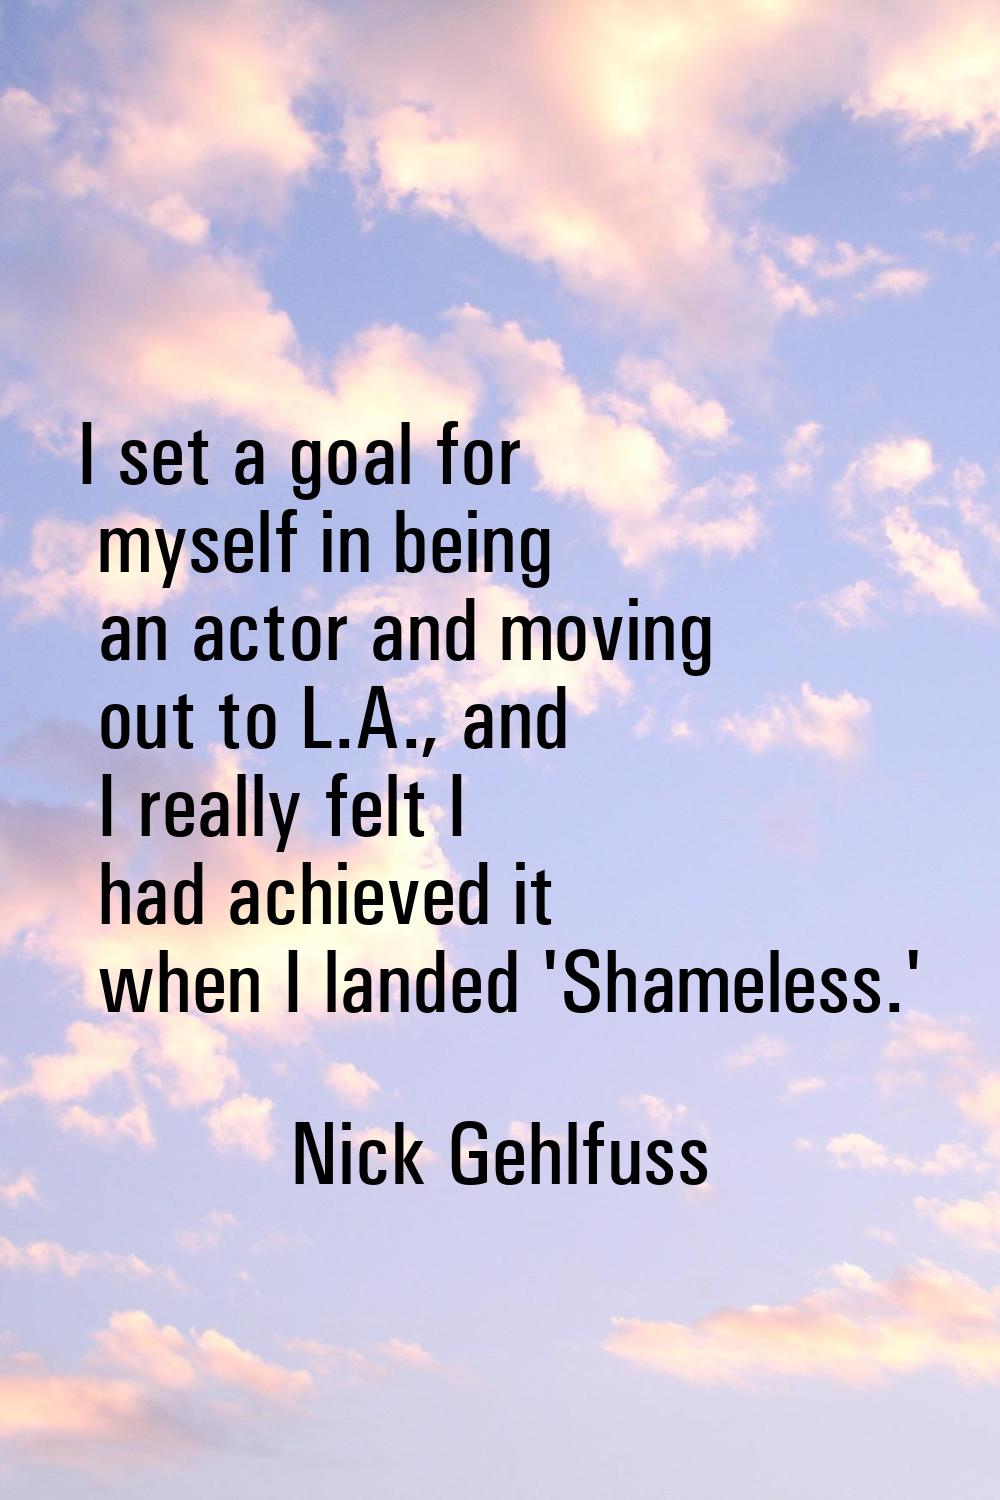 I set a goal for myself in being an actor and moving out to L.A., and I really felt I had achieved 